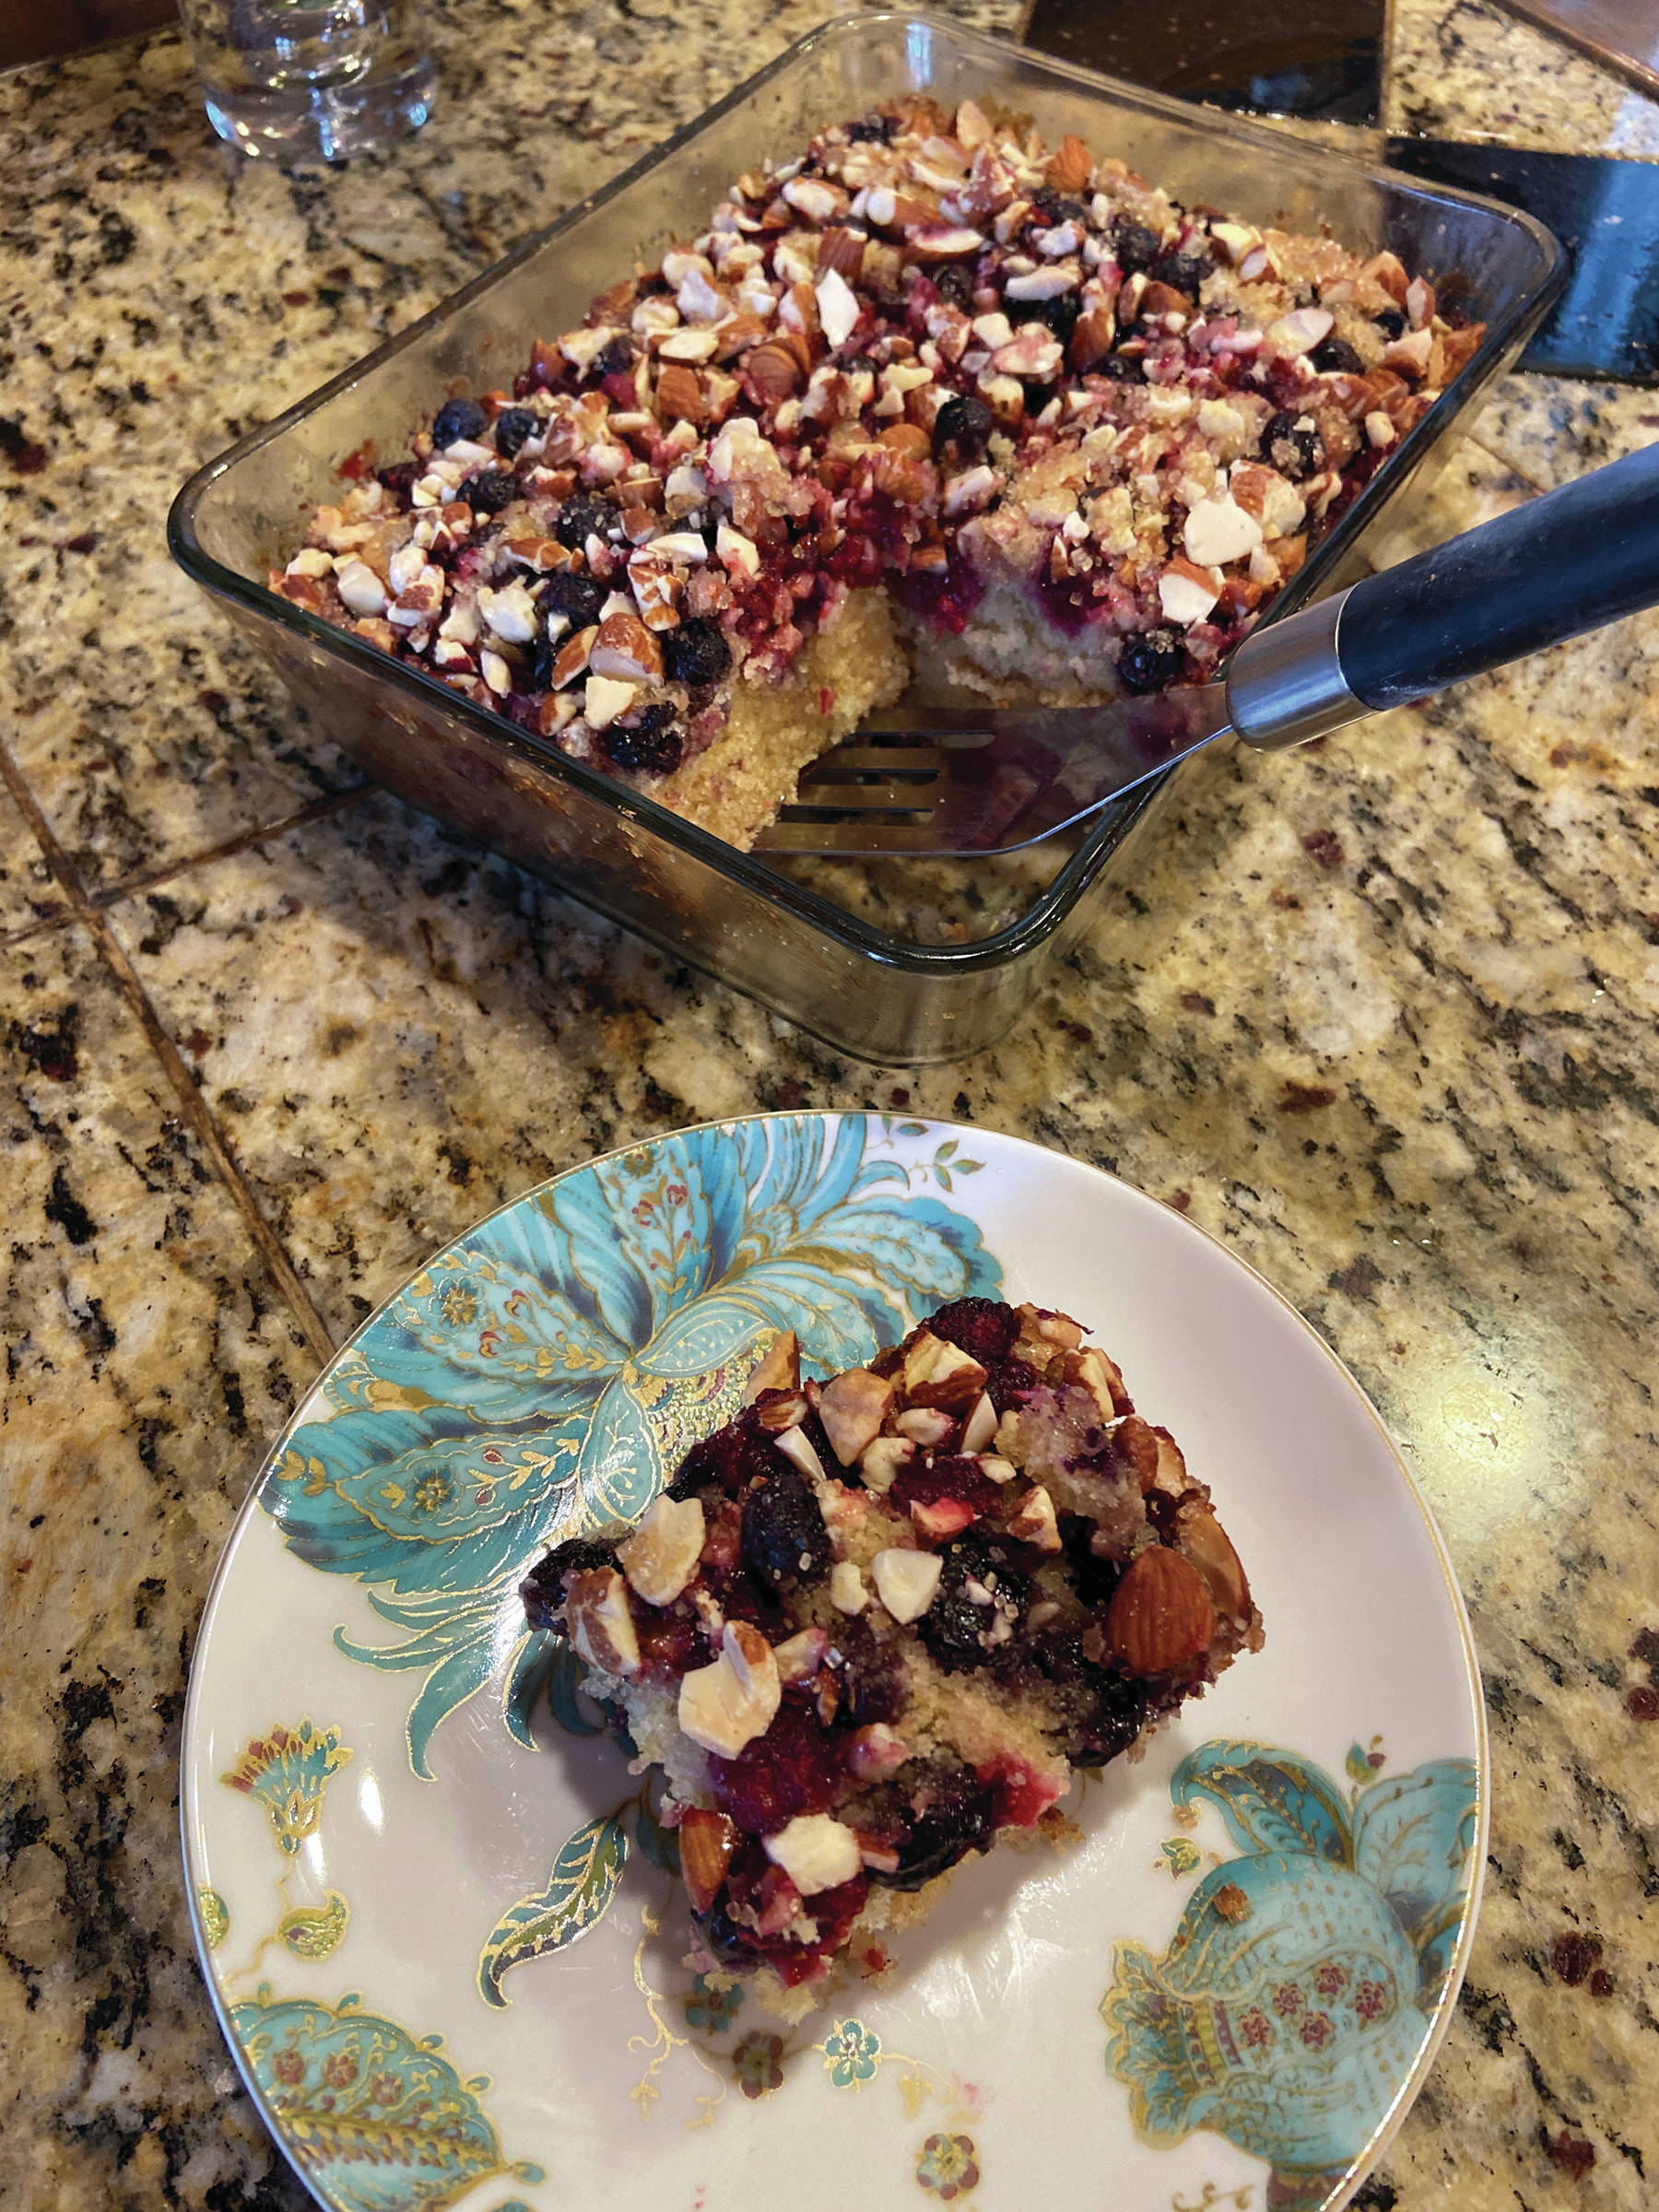 Eat dessert first with these Raspberry and Blueberry Cake Bars Teri Robl made on April 21, 2020, in her Homer, Alaska kitchen. (Photo by Teri Robl)